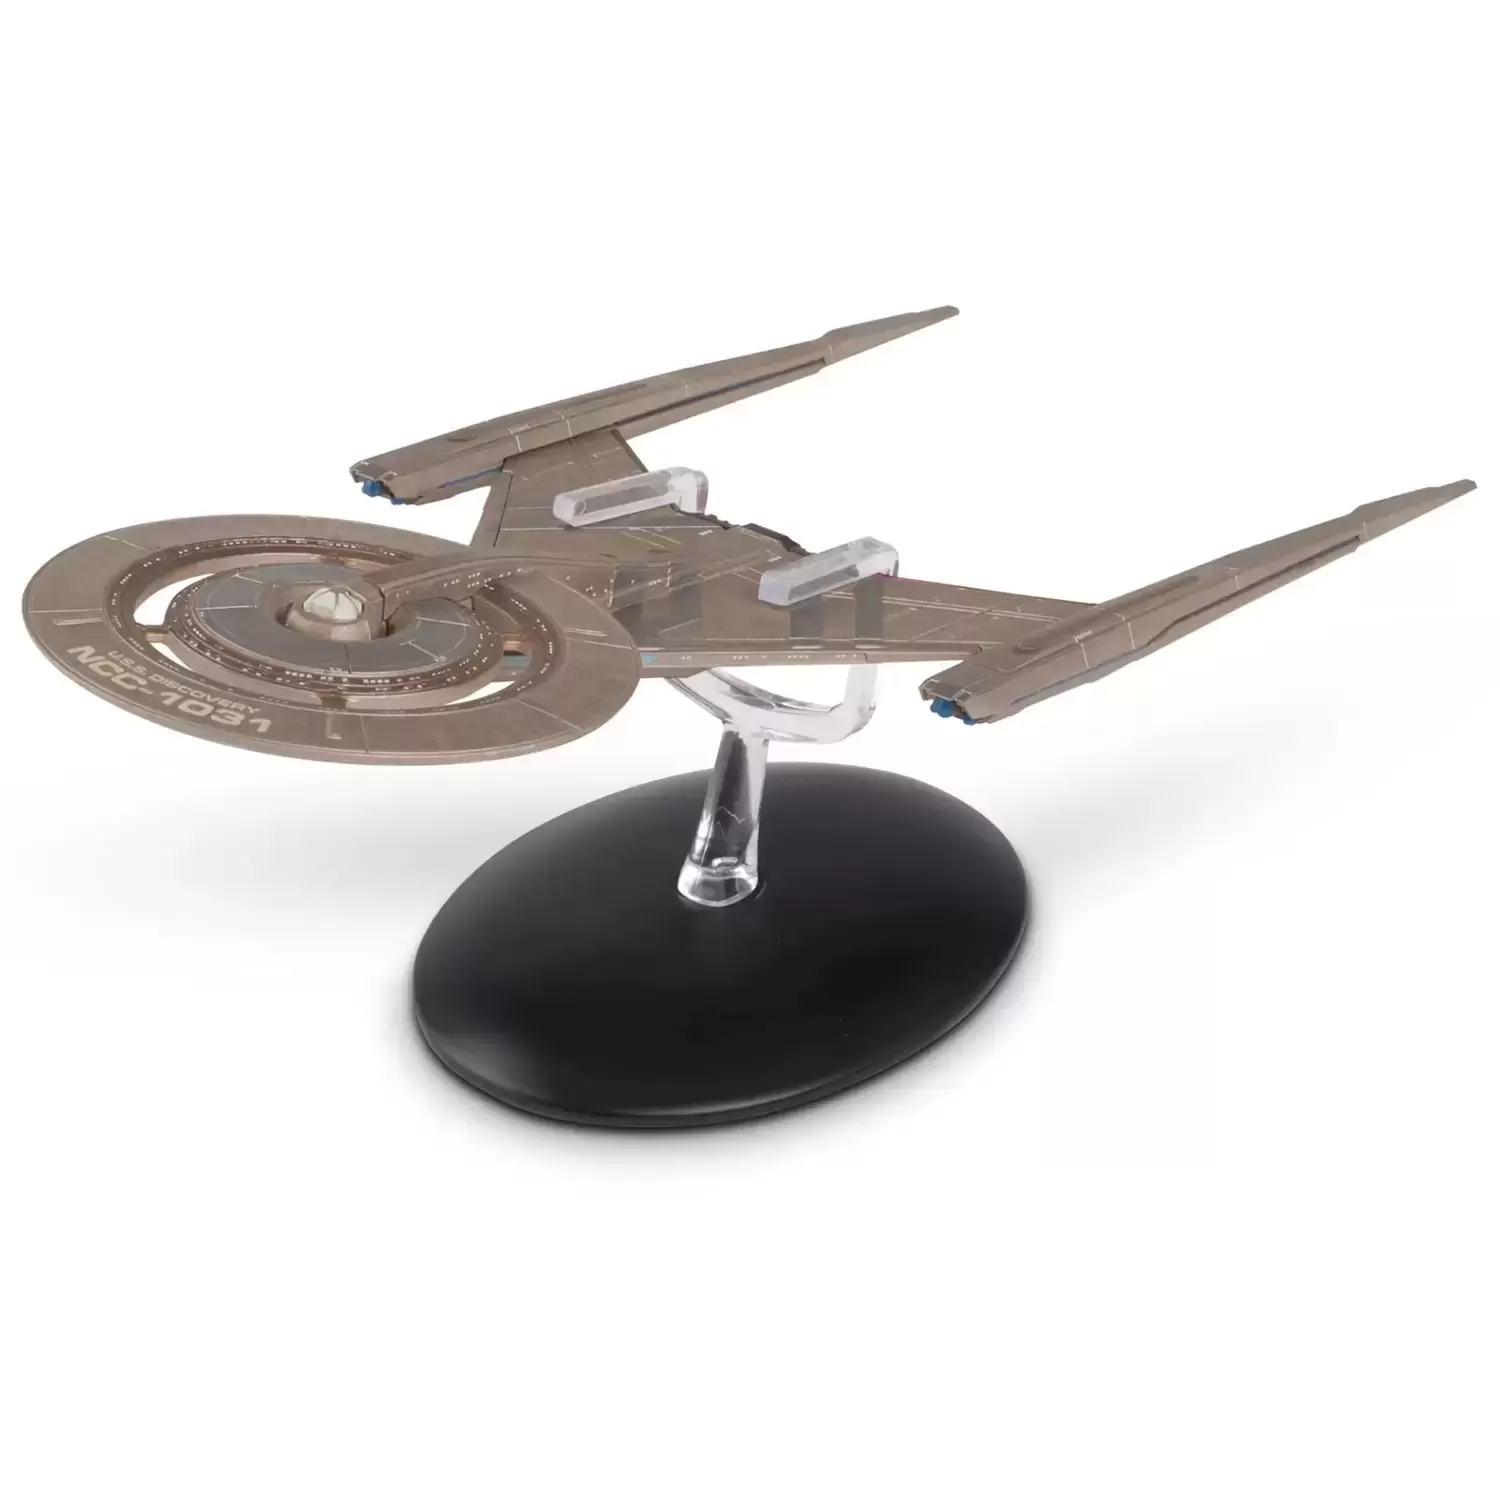 Star Trek Discovery The Official Starships Collection - U.S.S. Discovery NCC-1031 (Crossfield class)